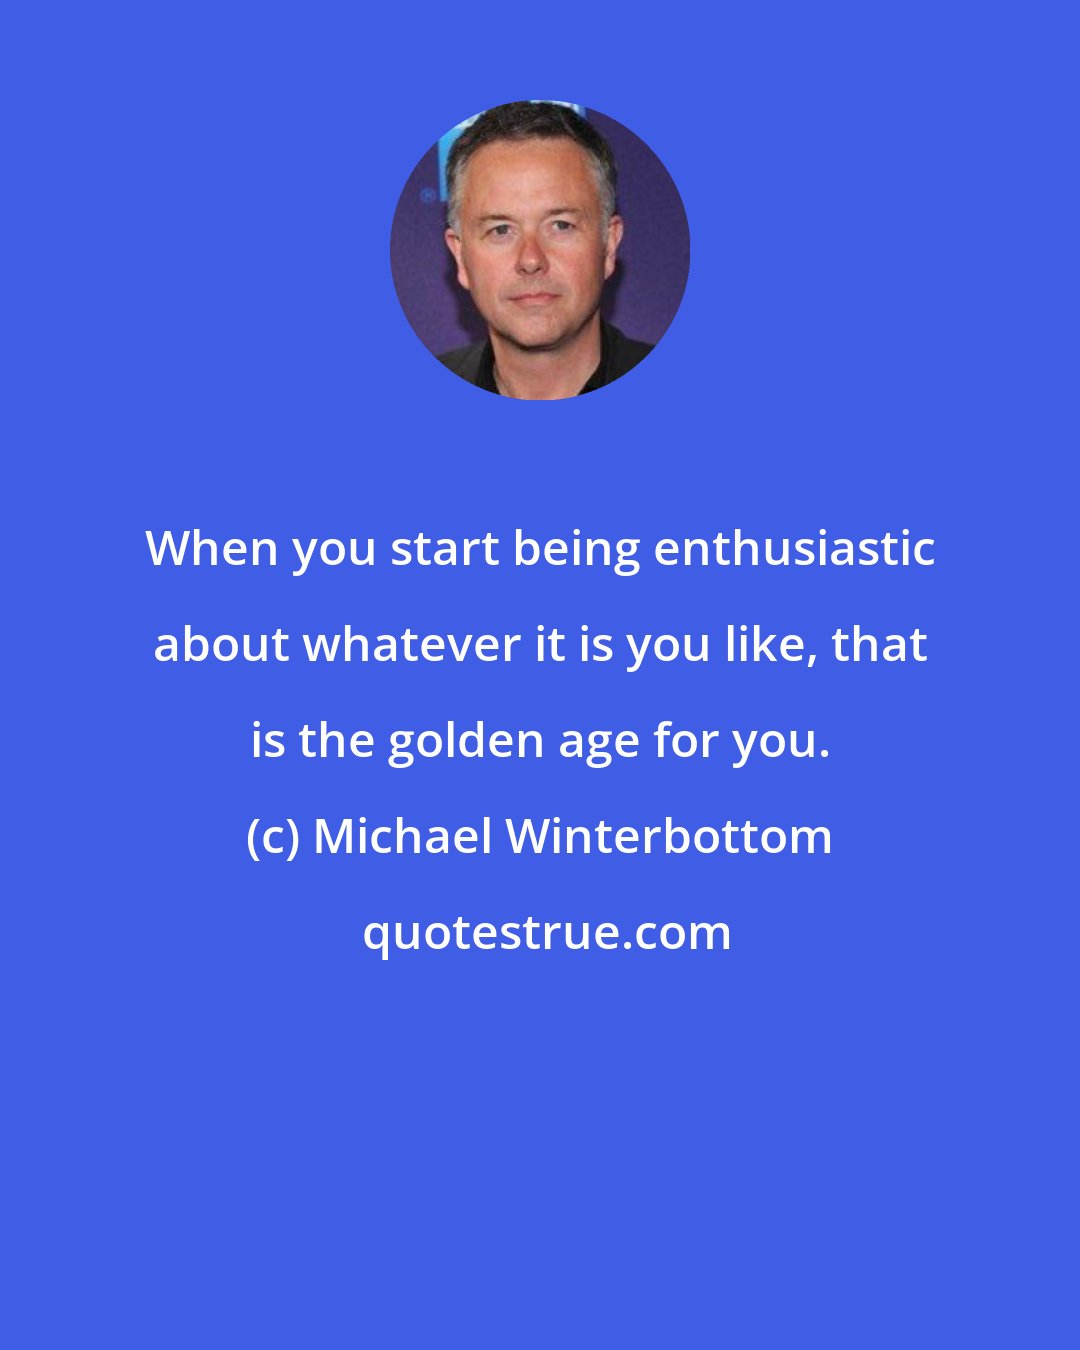 Michael Winterbottom: When you start being enthusiastic about whatever it is you like, that is the golden age for you.